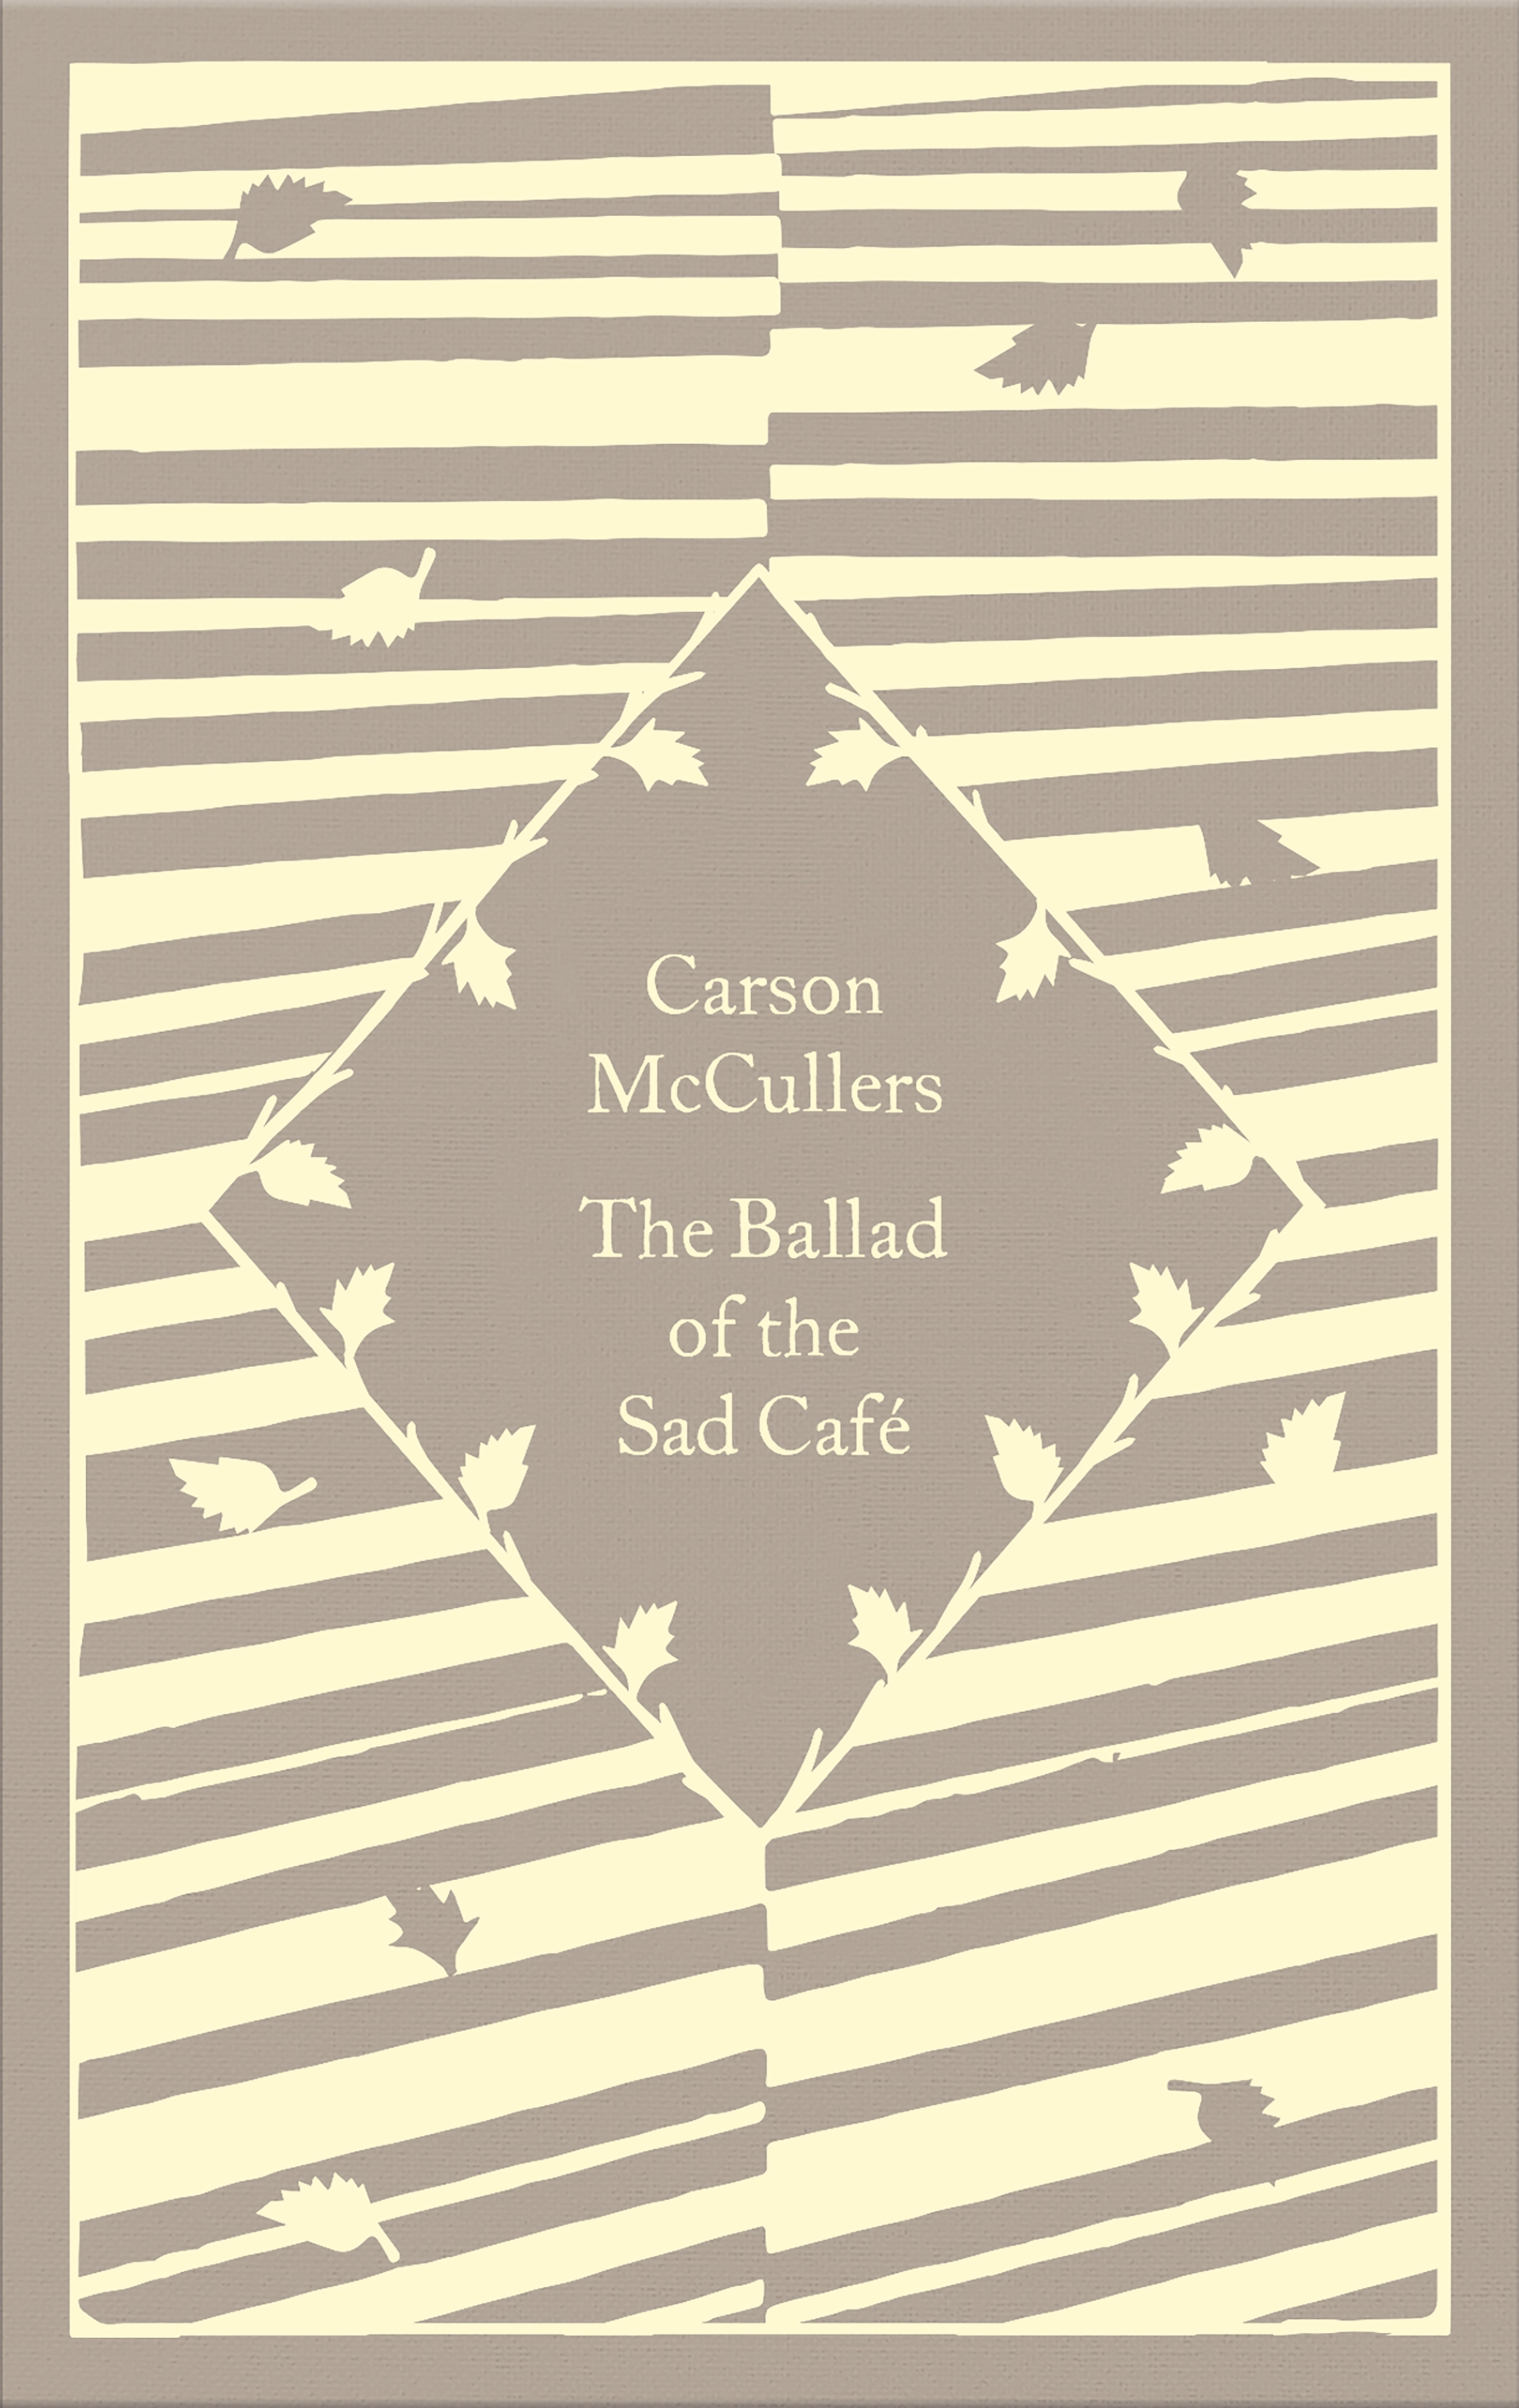 Book “The Ballad of the Sad Café” by Carson McCullers — August 25, 2022